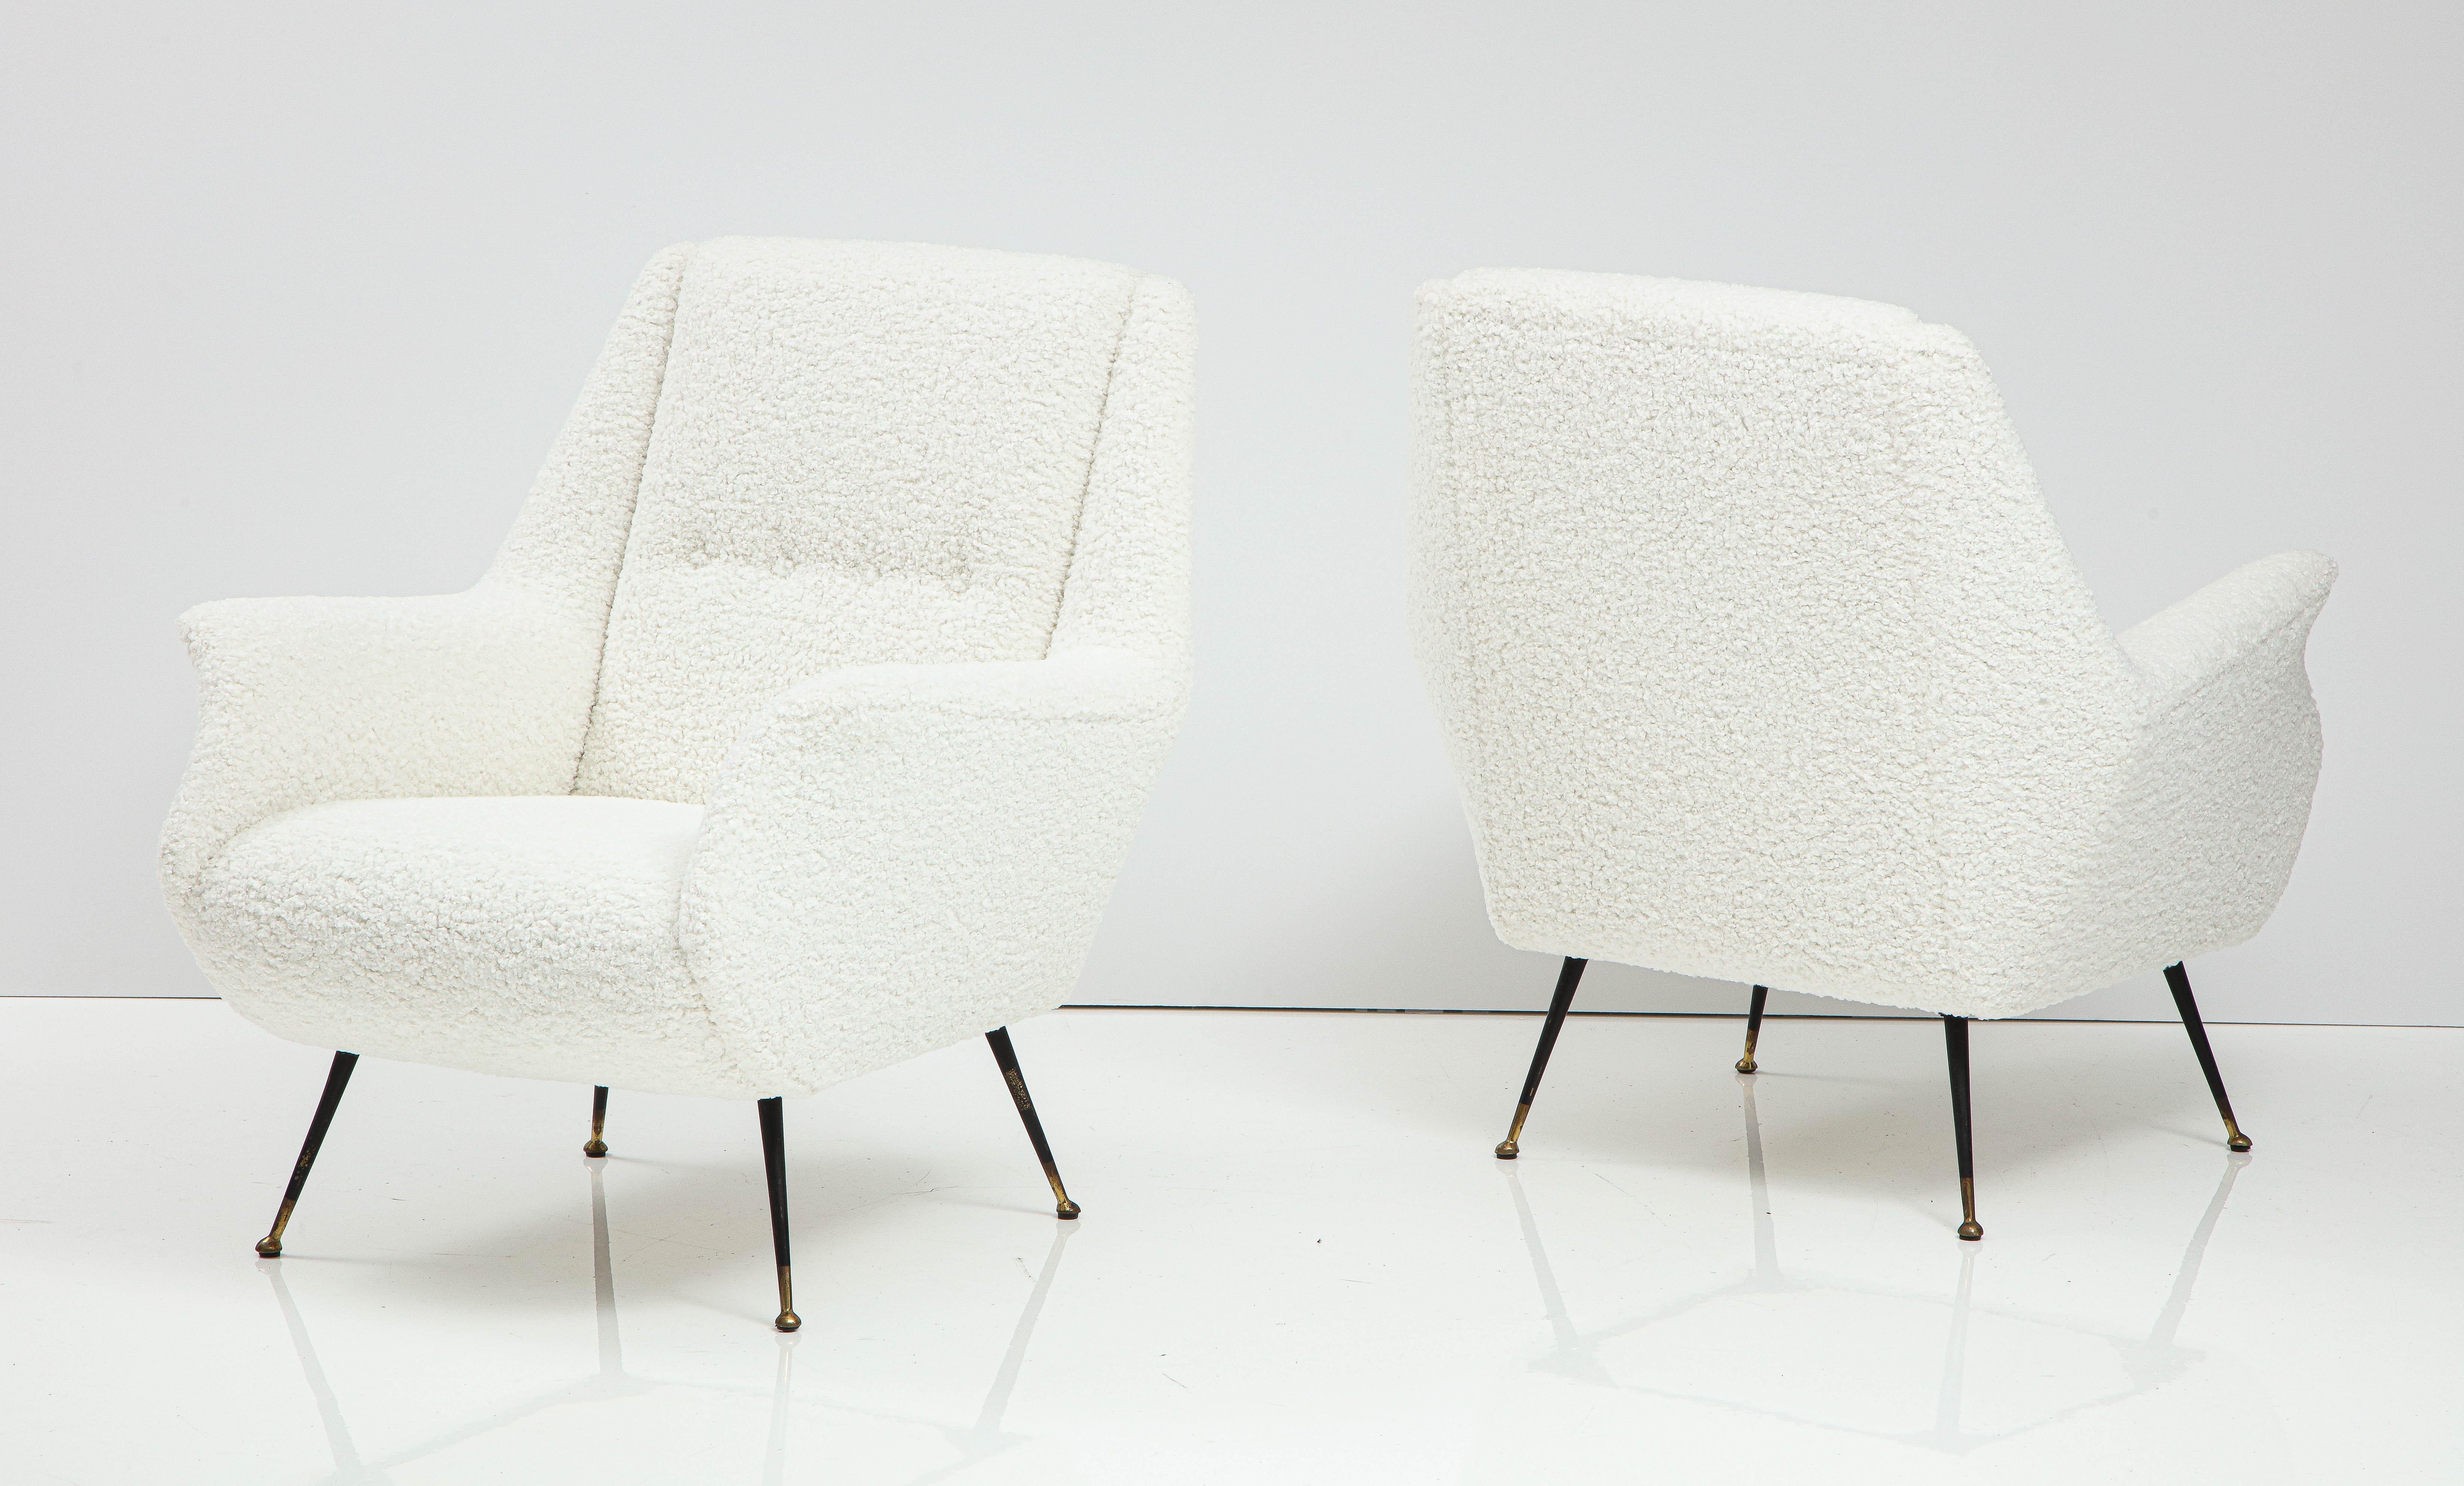 Pair of Italian Sculptural Faux Shearling Lounge Chairs, Italy, circa 1960 In Good Condition For Sale In New York, NY